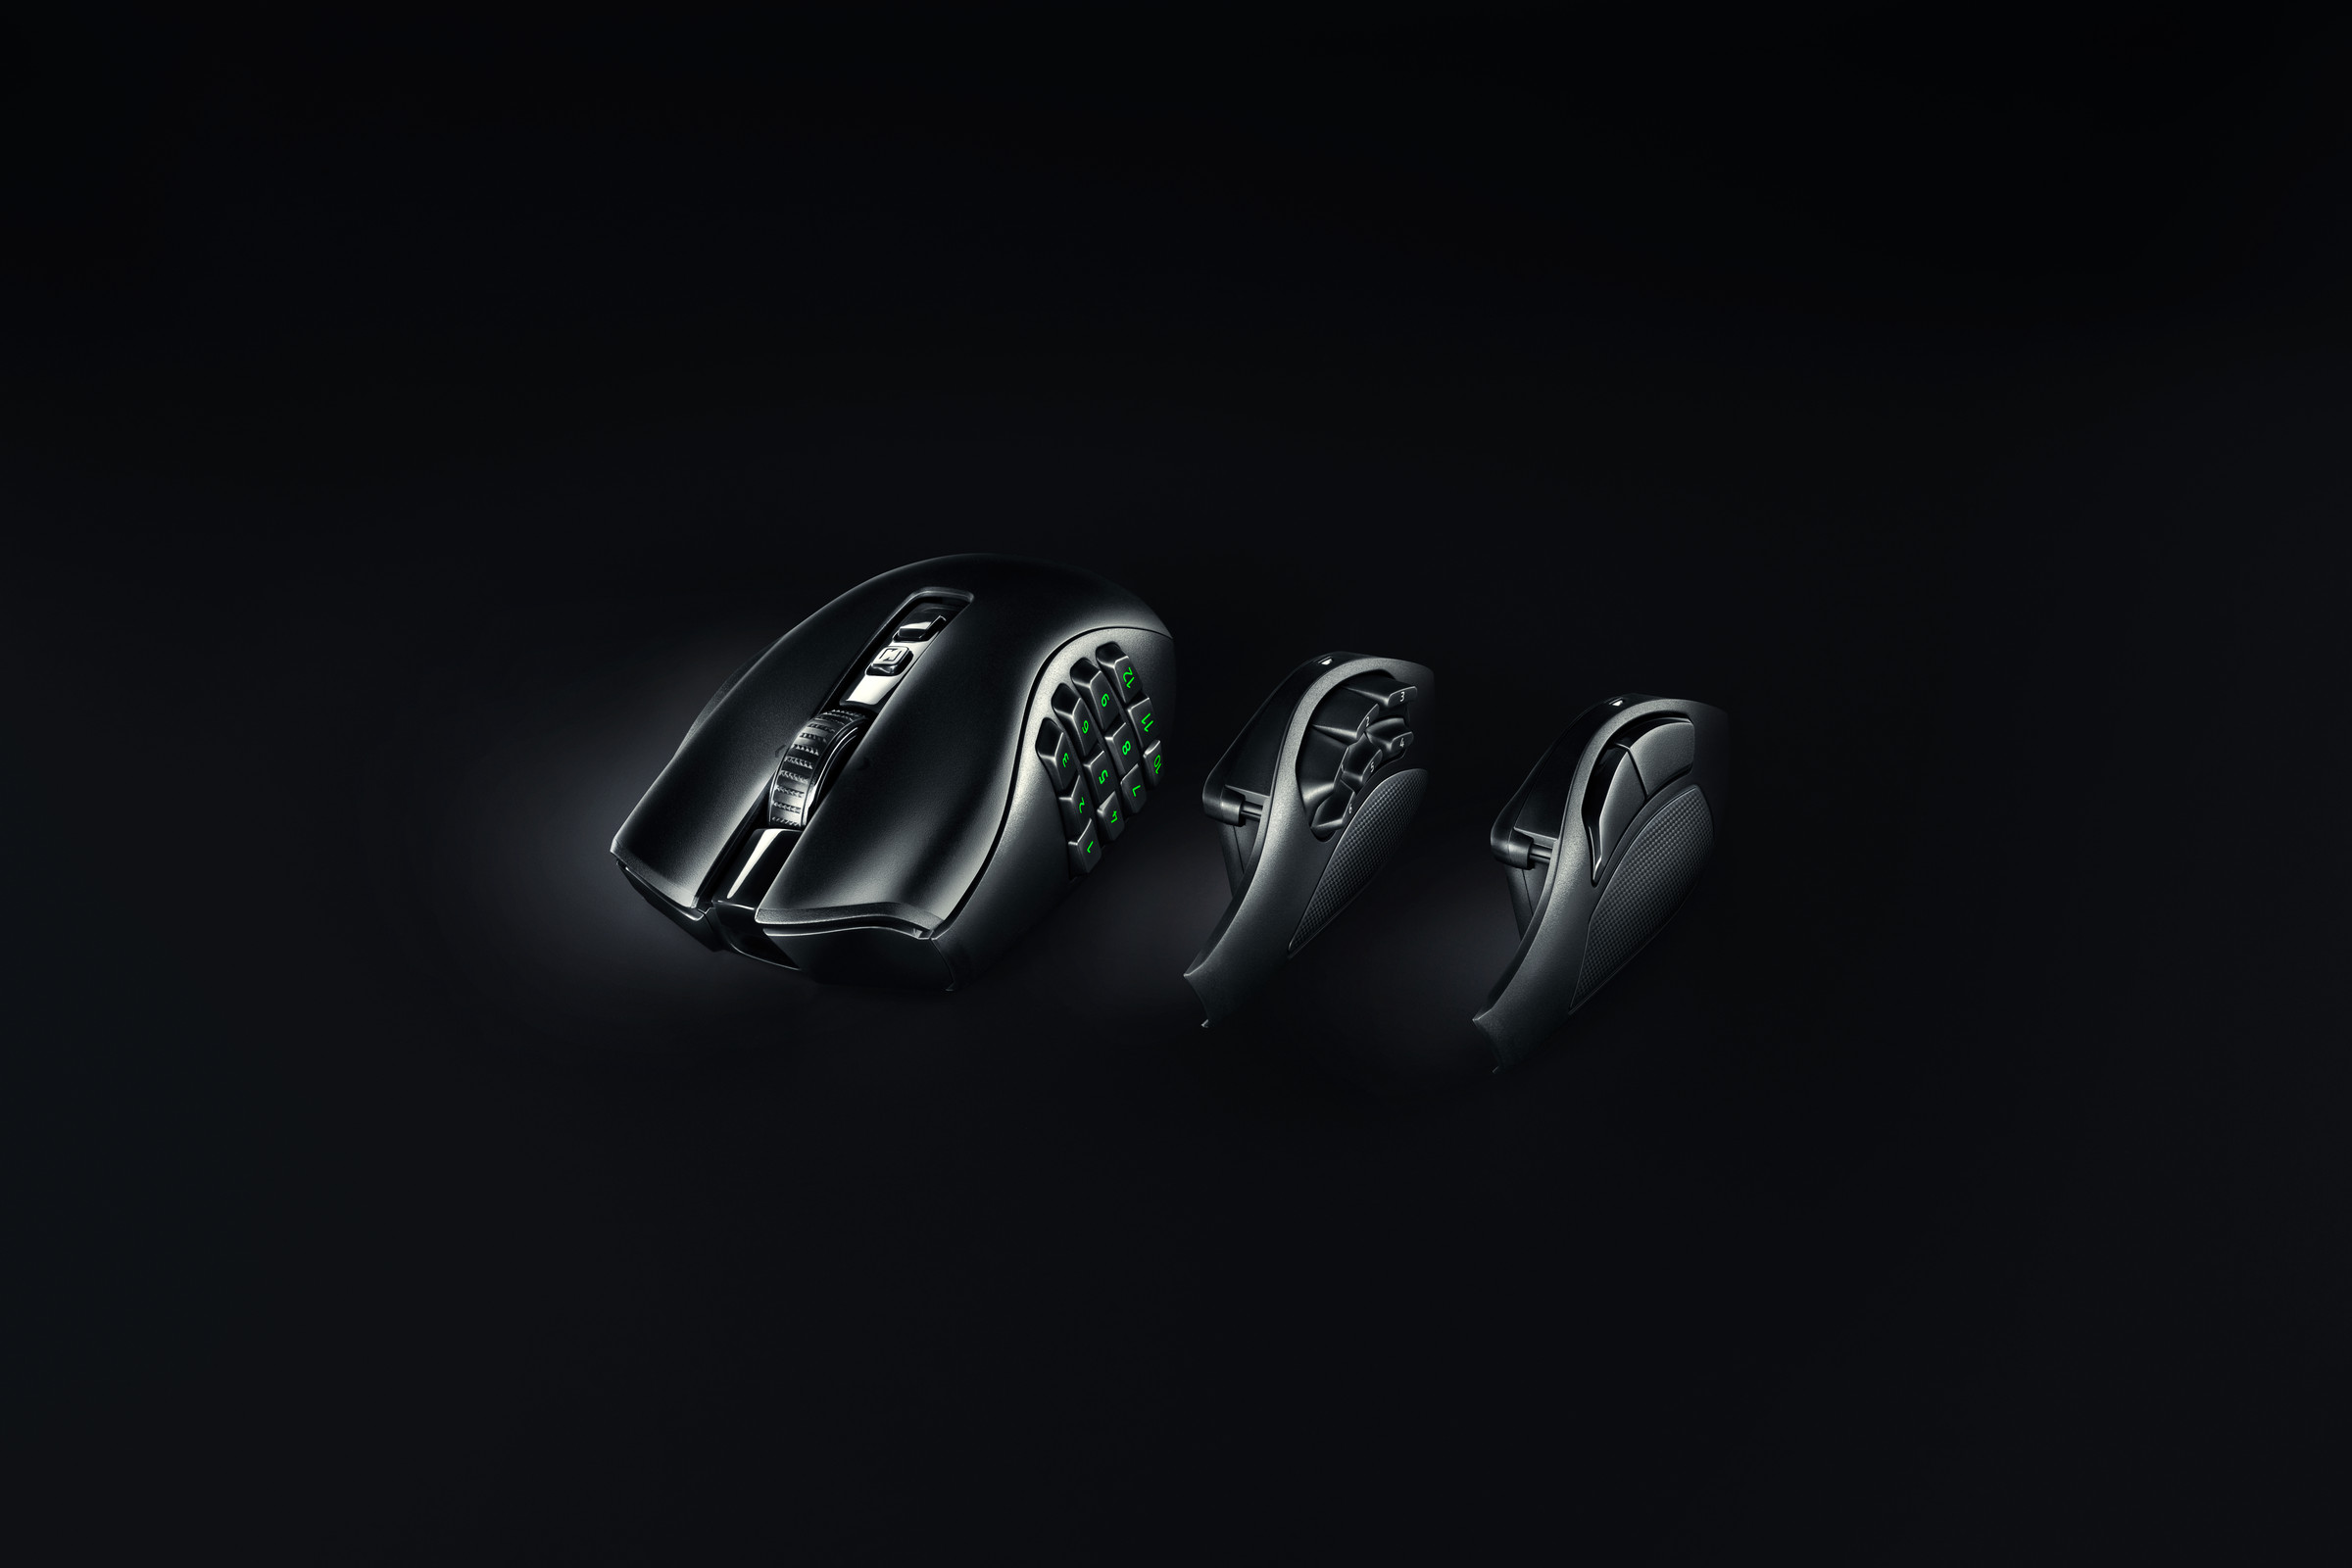 A render of the Razer Naga V2 Pro and its swappable button plates